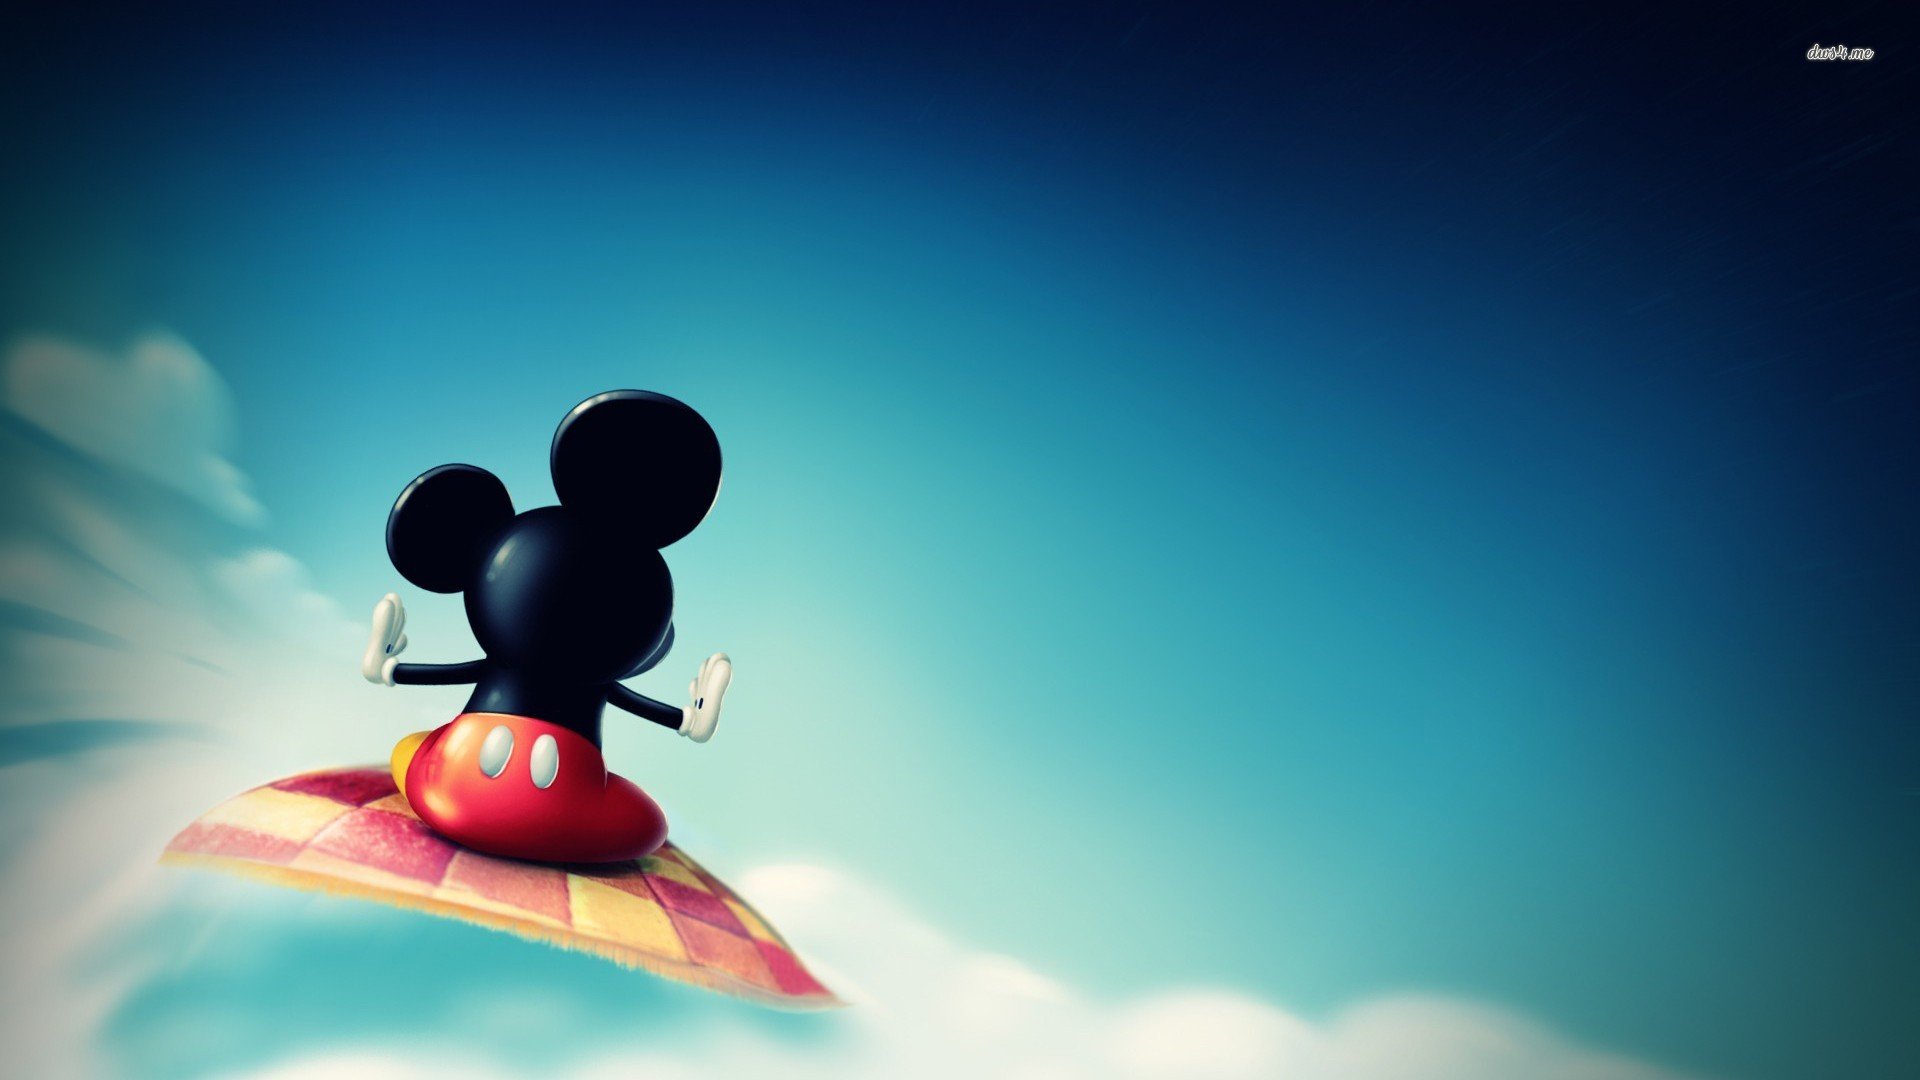 World Of Illusion Starring Mickey Mouse And Donald - Mickey Desktop Background - HD Wallpaper 